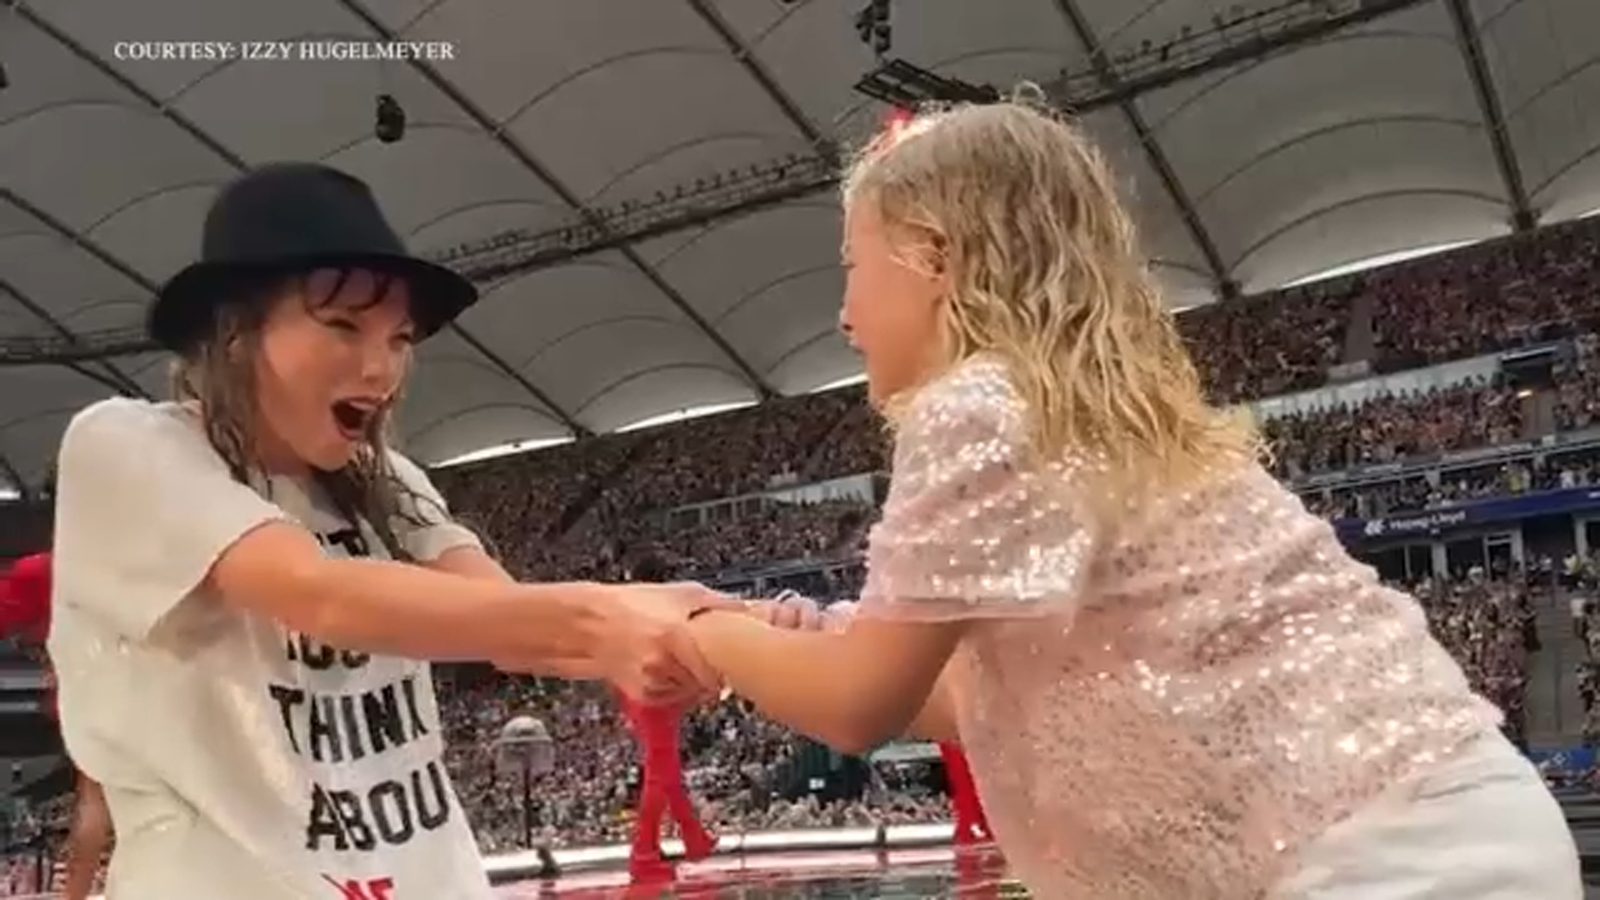 Taylor Swift hat: North Carolina girl goes viral after receiving “22” fedora during The Eras Tour stop in Hamburg, Germany [Video]